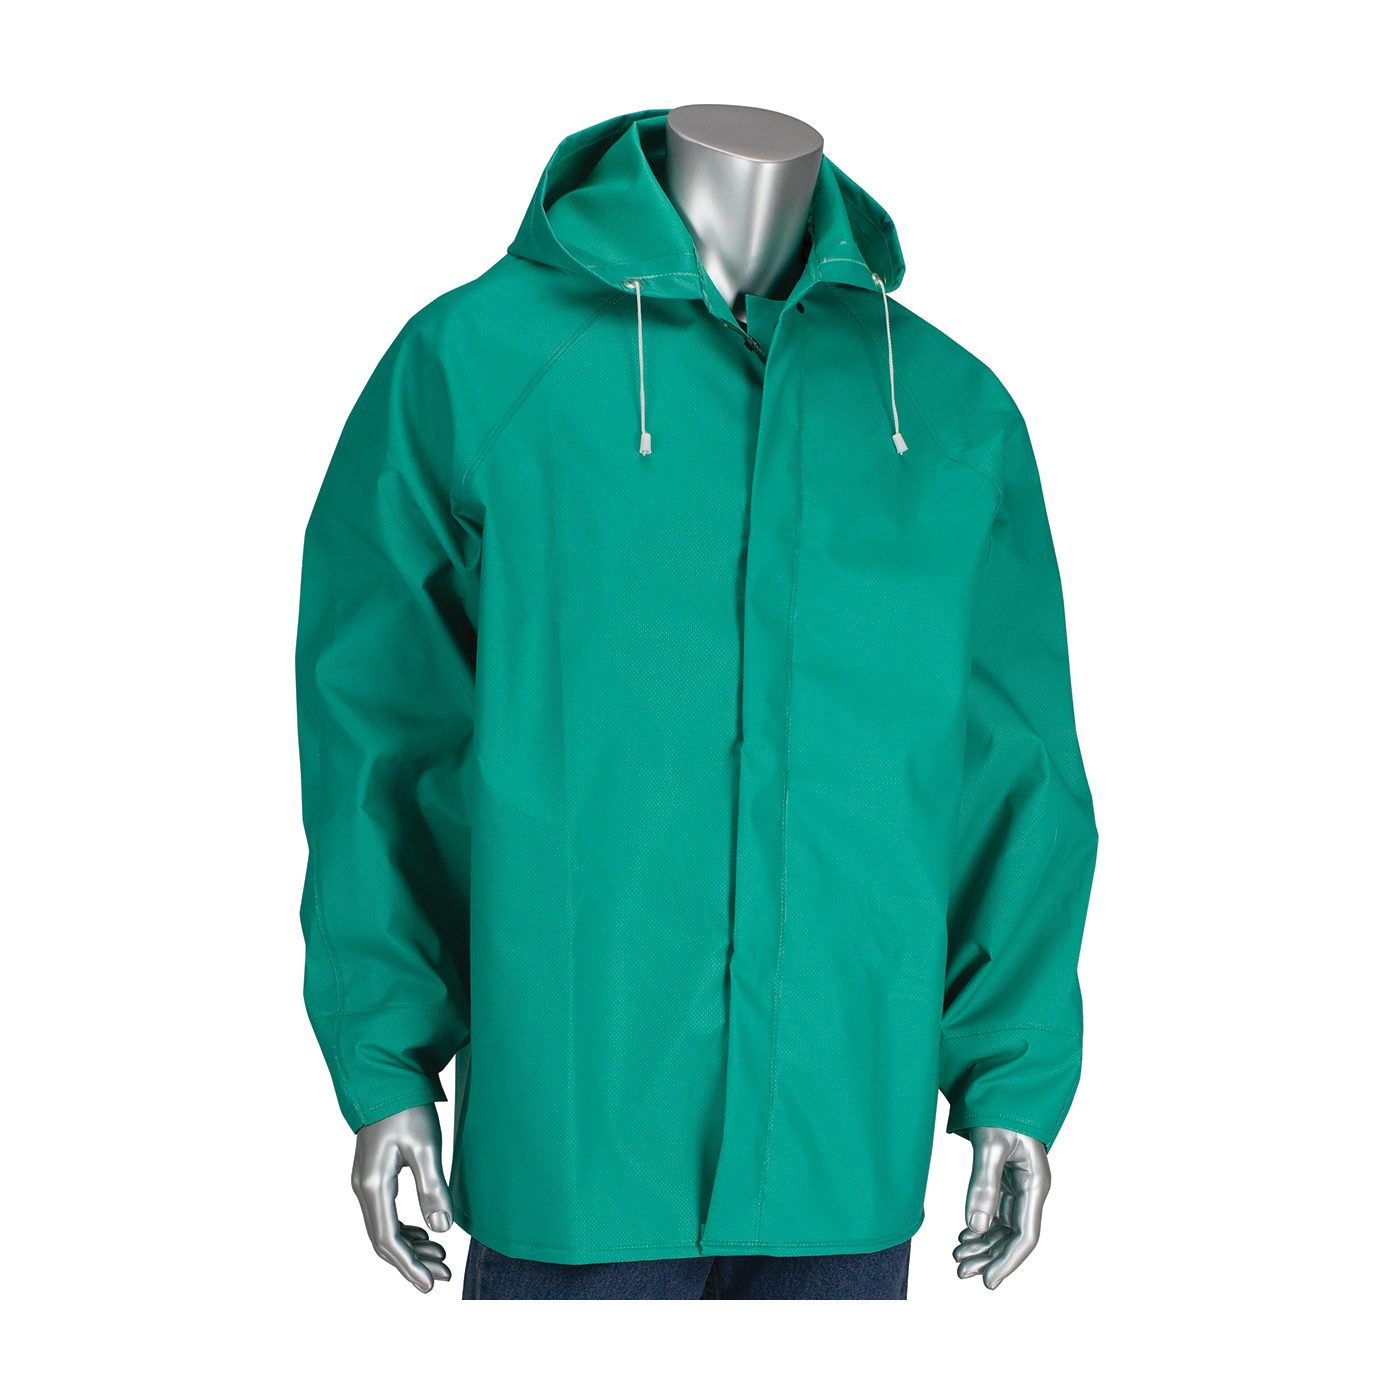 PIP® FALCON™ ChemFR™ 205-420JH/S Rain Jacket With Hood, S, Green, Nylon/PVC, Resists: Flame and Water, ASTM D6413